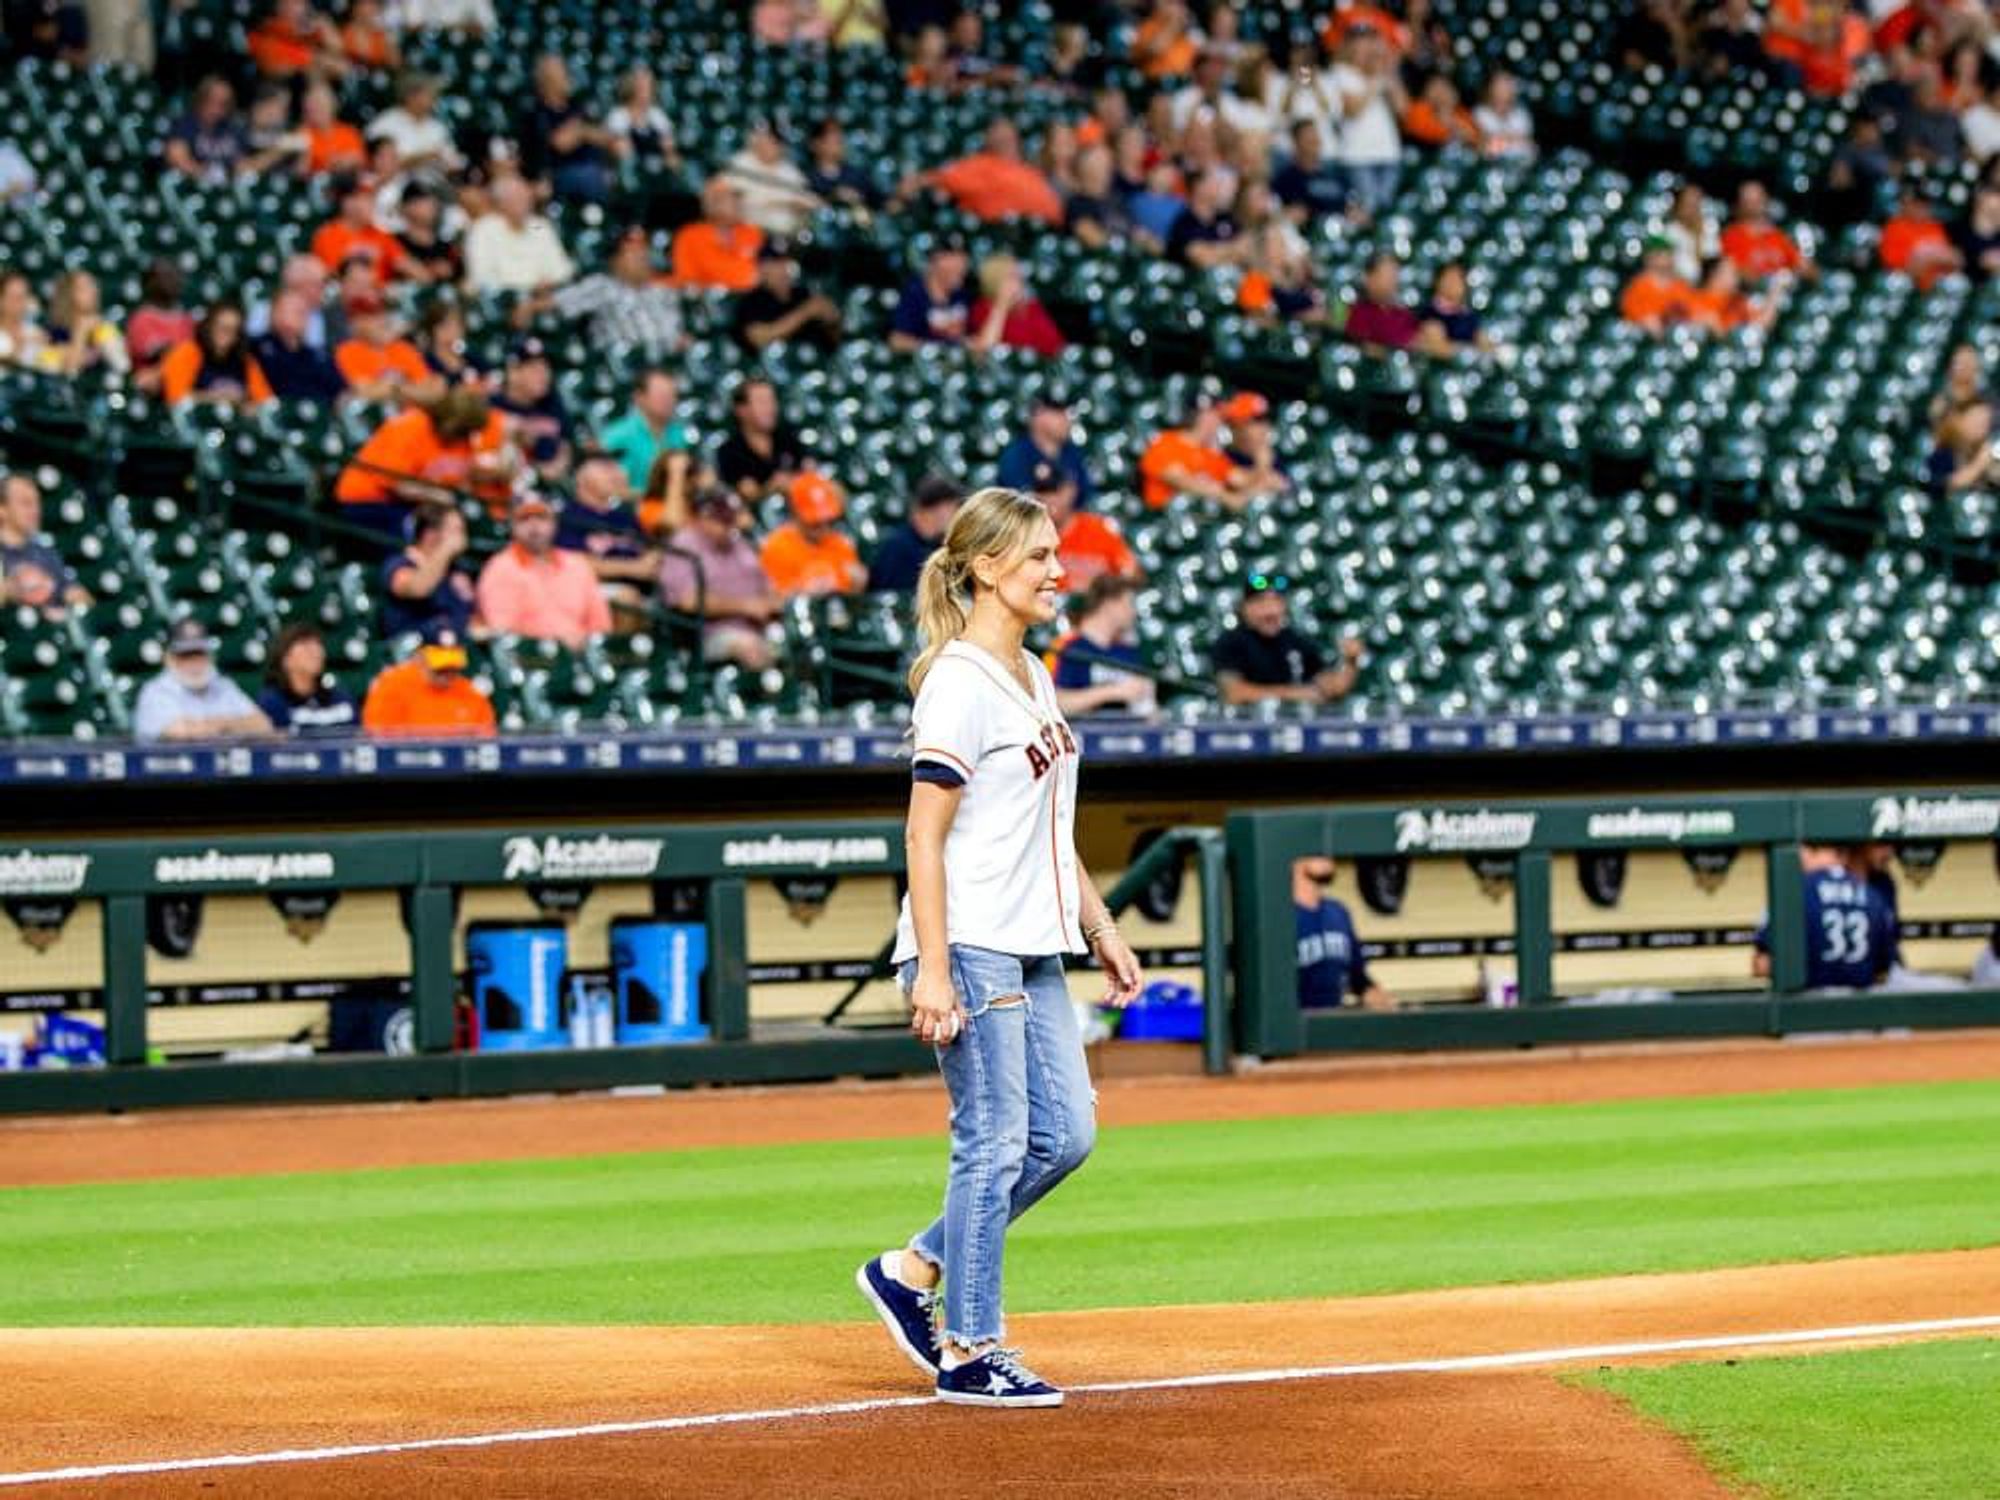 Kendra Scott Astros first pitch Minute Maid Park